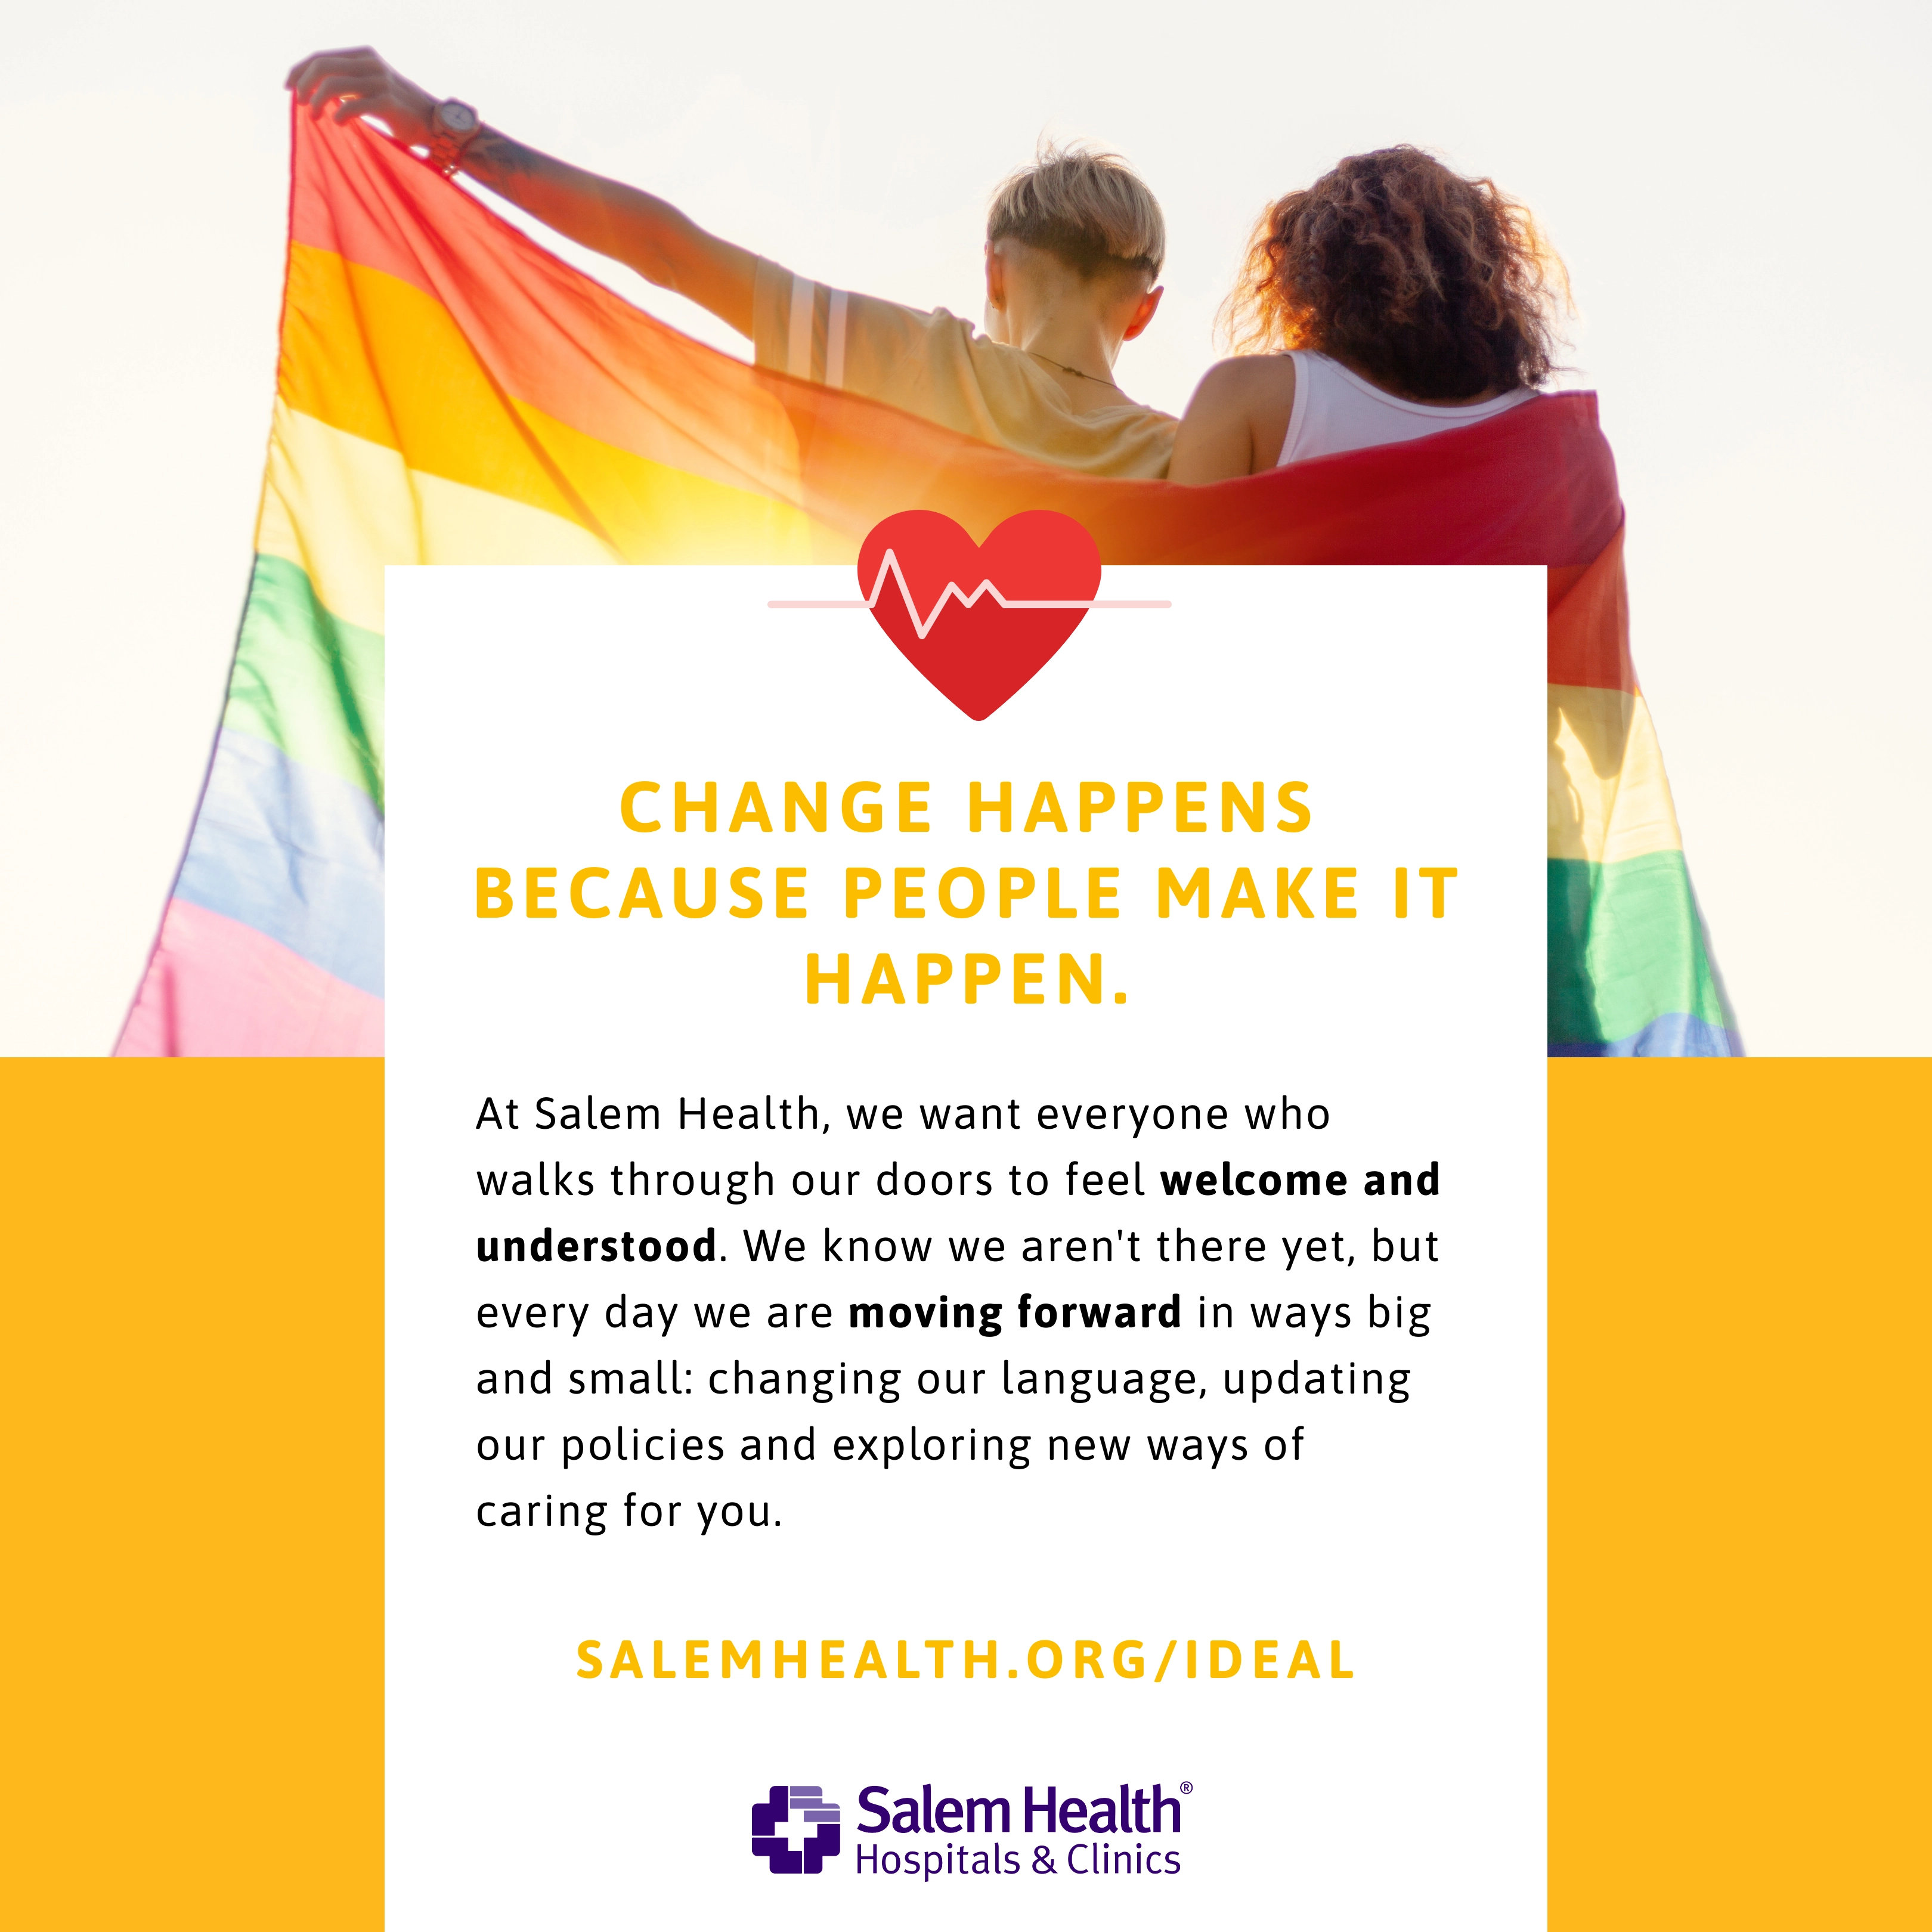 A lesbian couple embraces with a rainbow flag. The text reads: CHANGE HAPPENS BECAUSE PEOPLE MAKE IT HAPPEN.